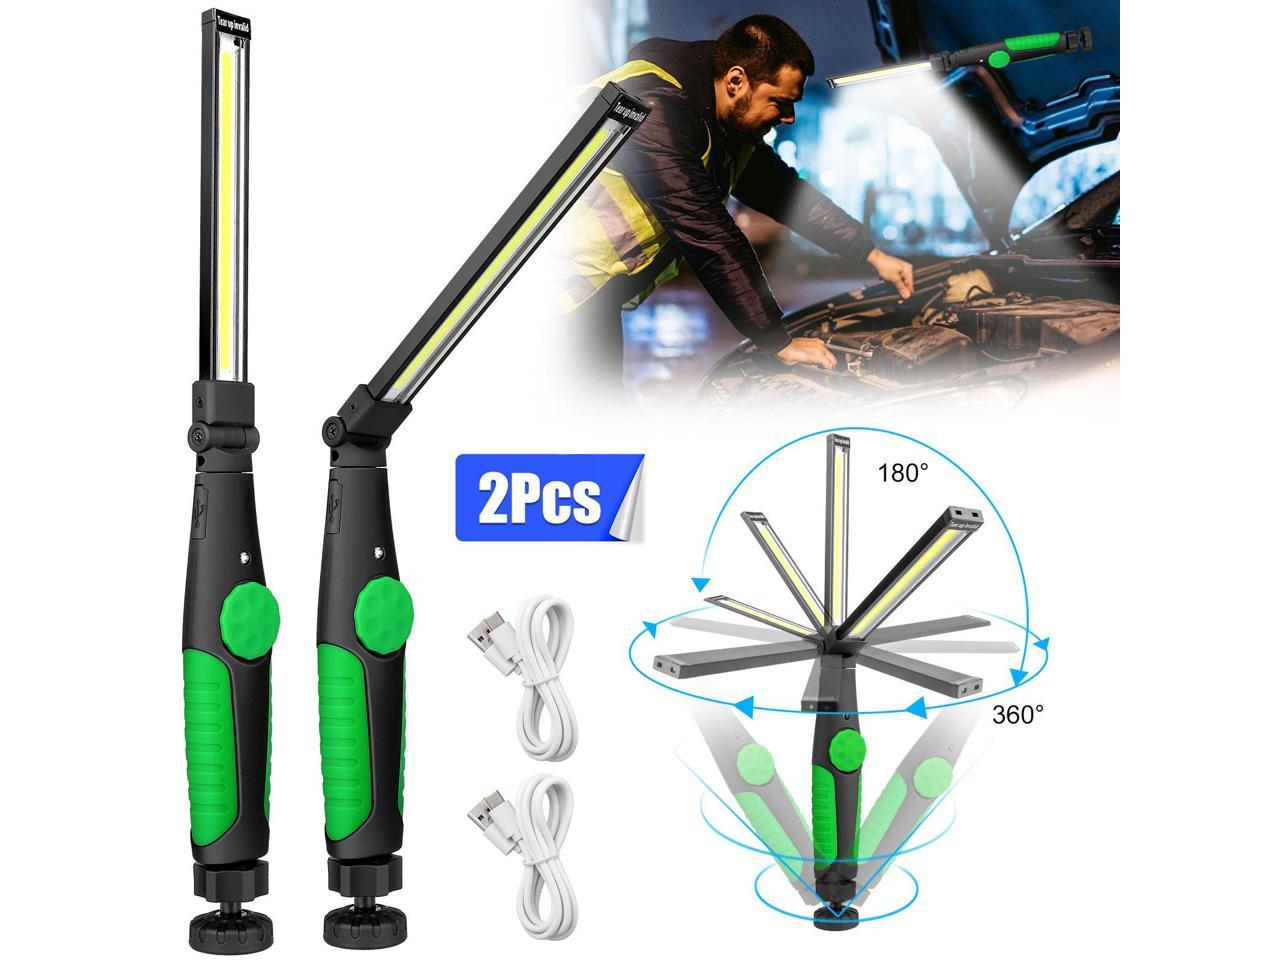 10000LM Rechargeable COB LED Slim Work Light Lamp Torch Flashlight w/ USB Cable 